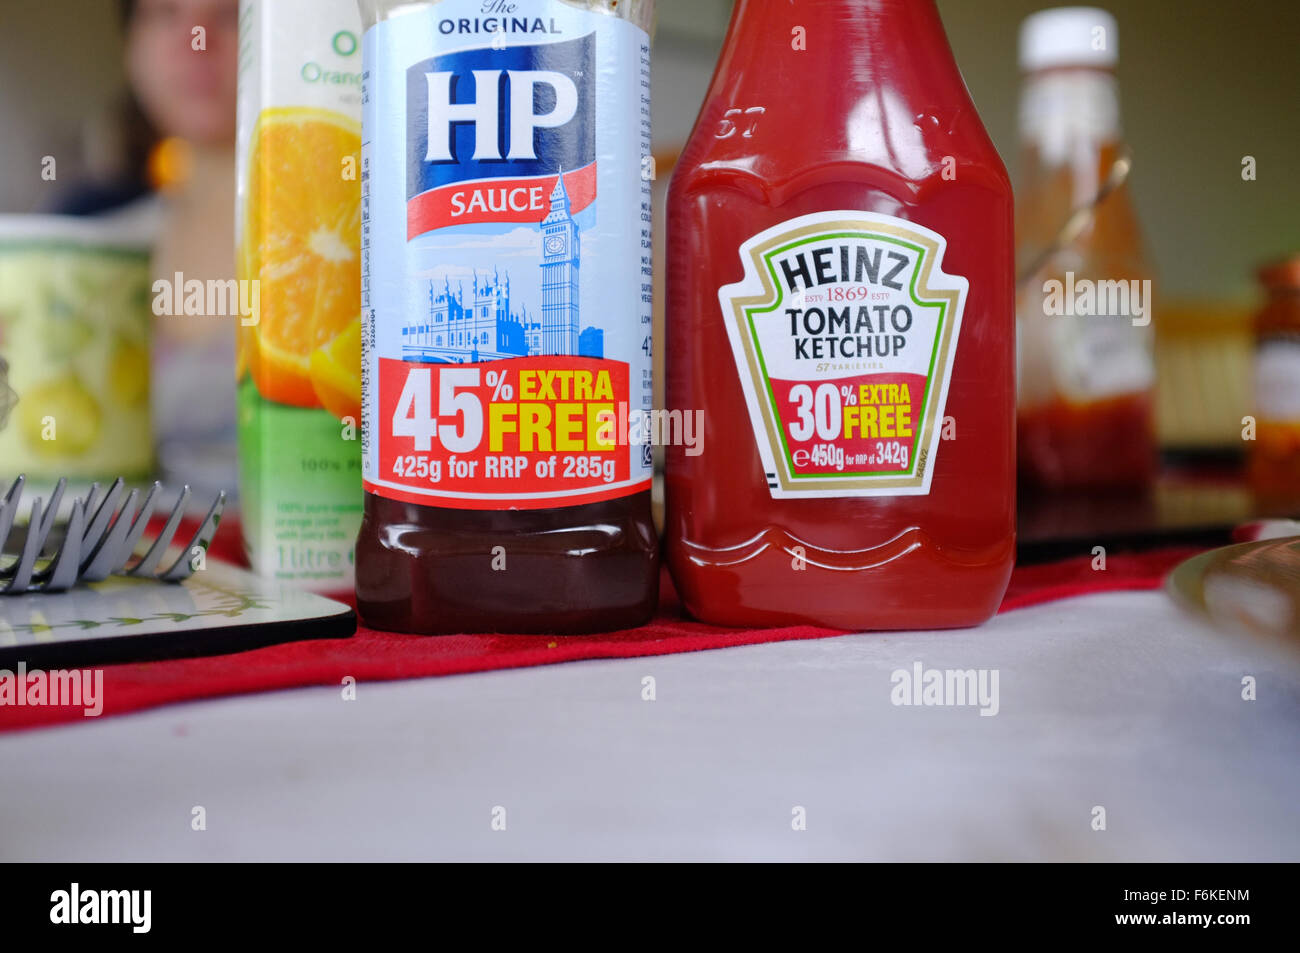 A HP sauce bottle next to a tomato sauce bottle on a breakfast table Stock  Photo - Alamy